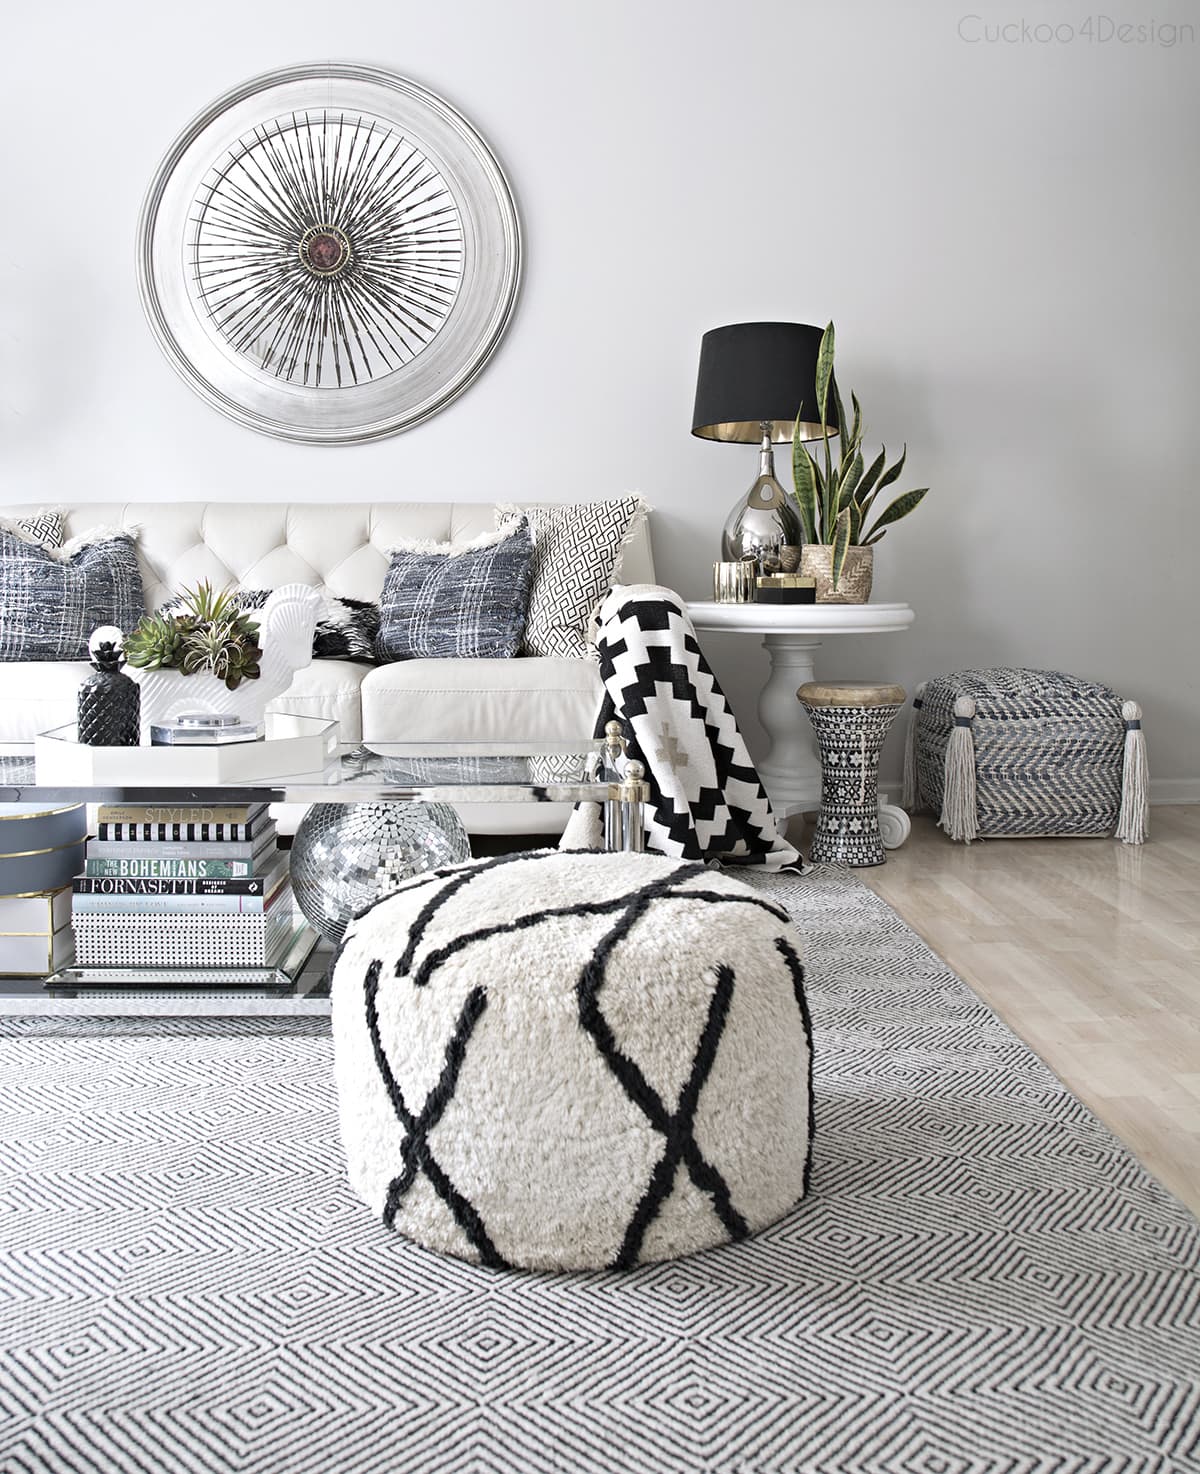 view of living room with denim decor and black and white accents with finished tassel ottoman